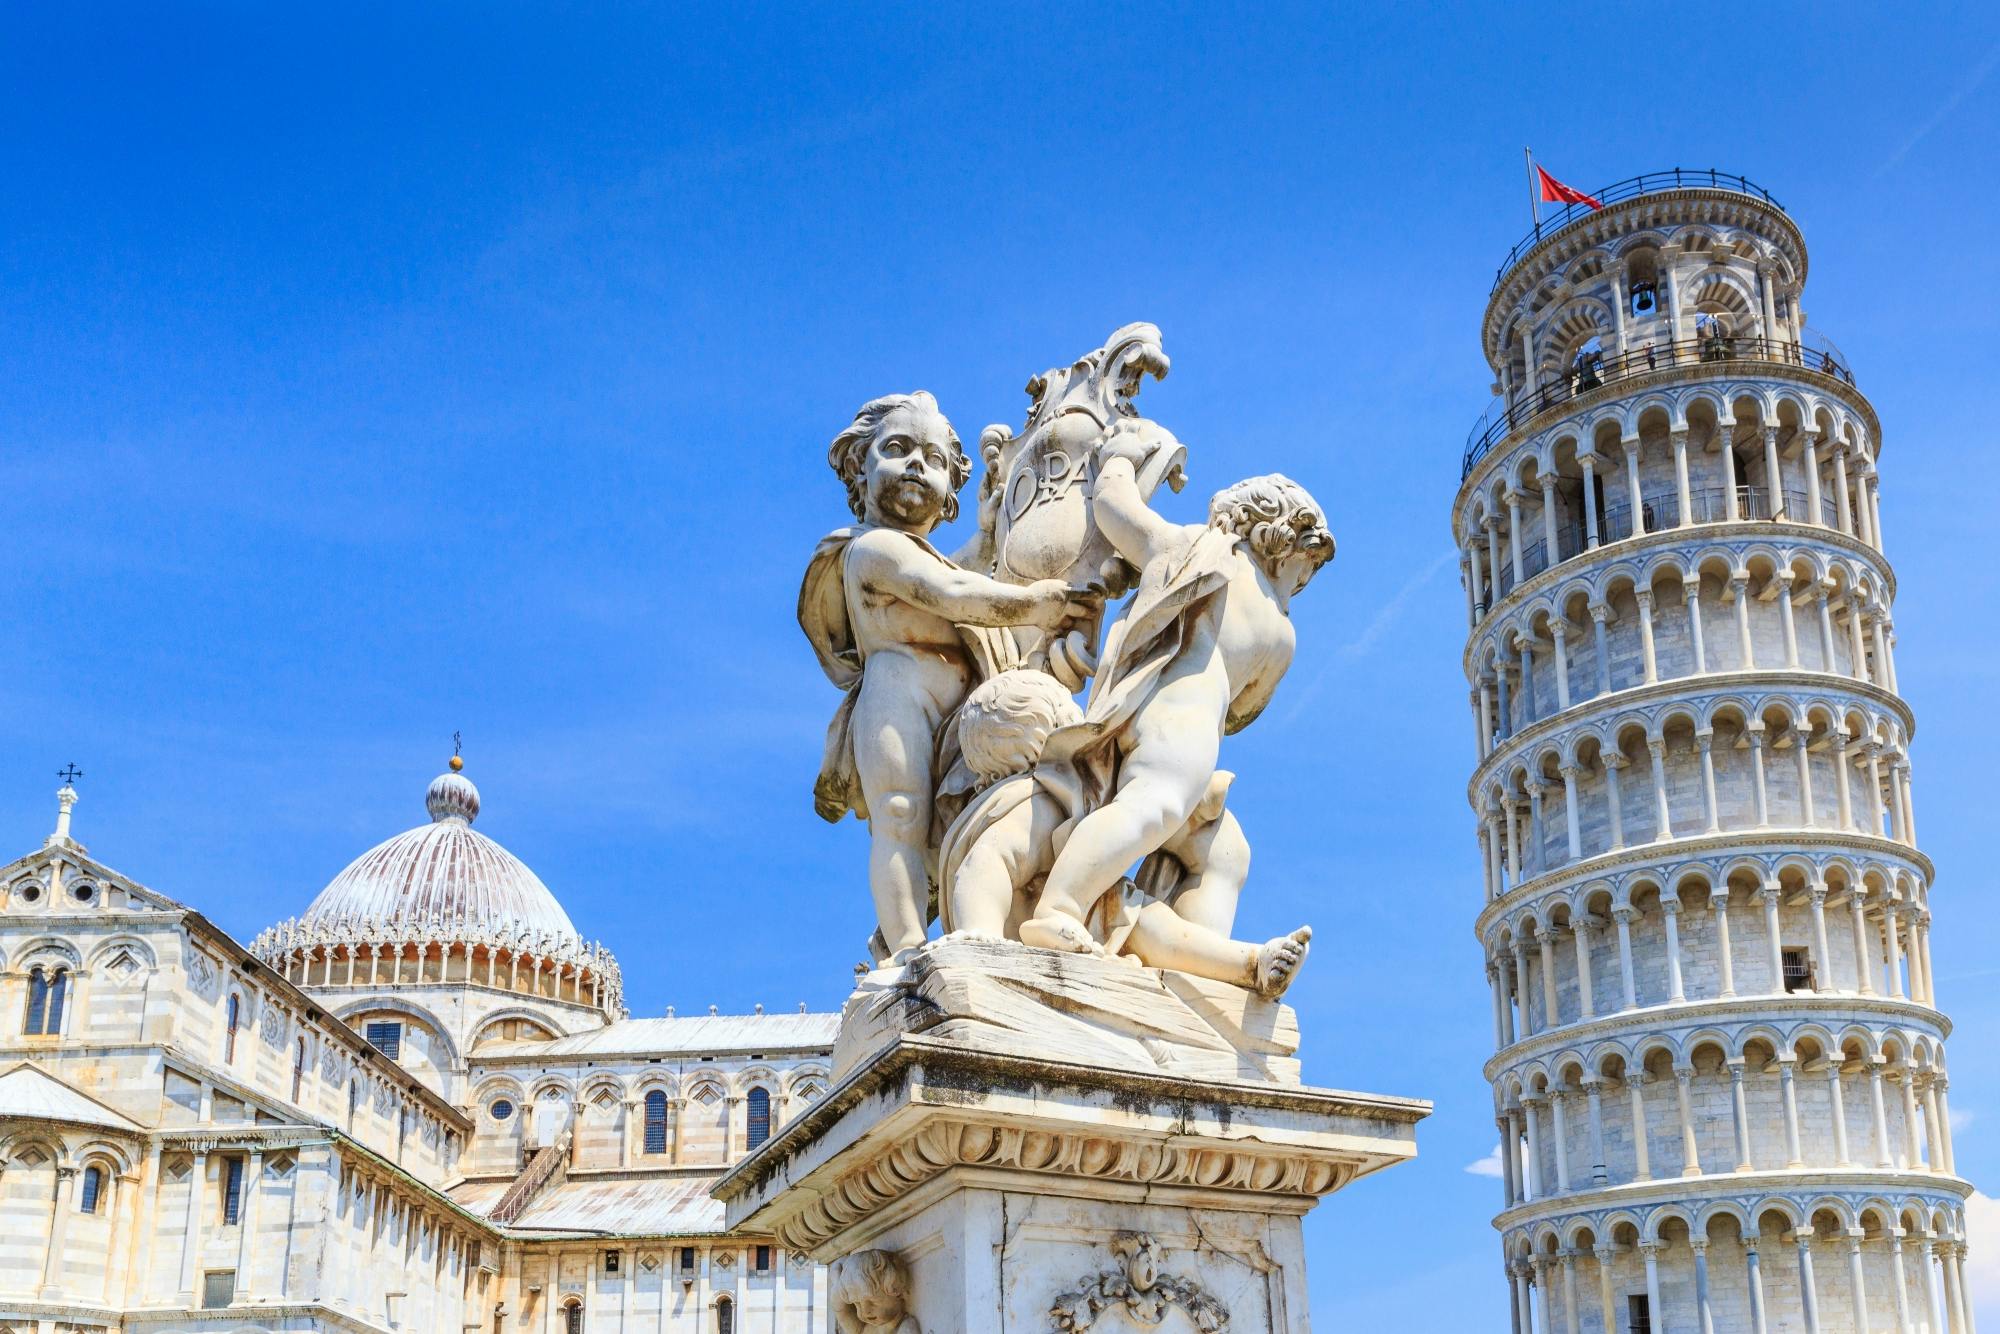 Pisa half-day tour with pickup from Montecatini Terme